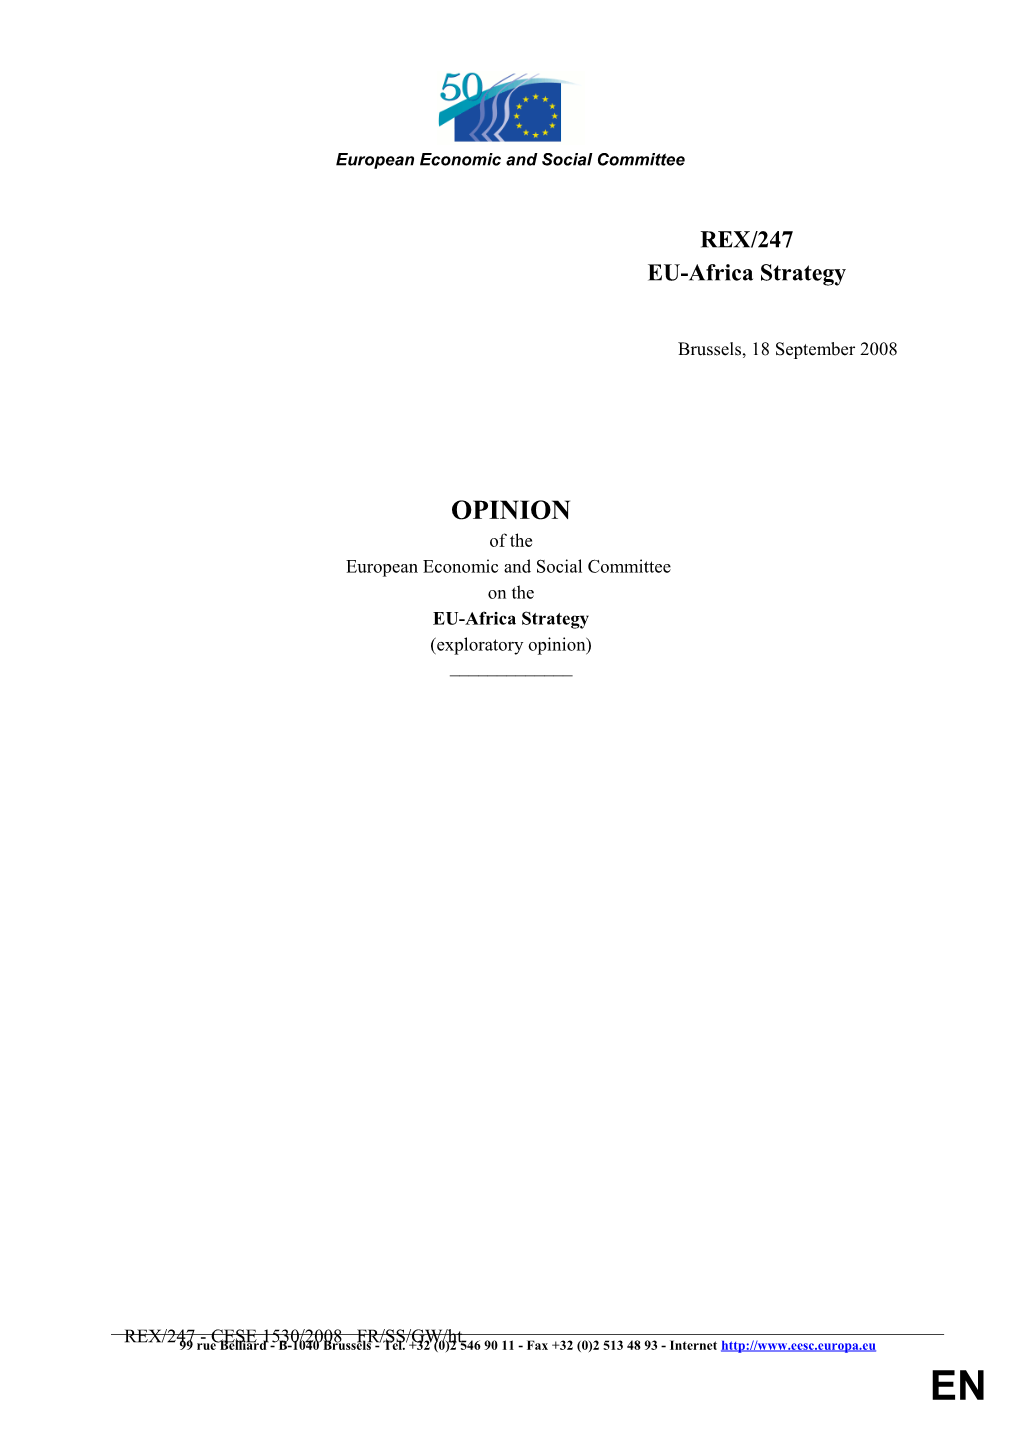 Committee Opinion CES1530-2008 AC EN